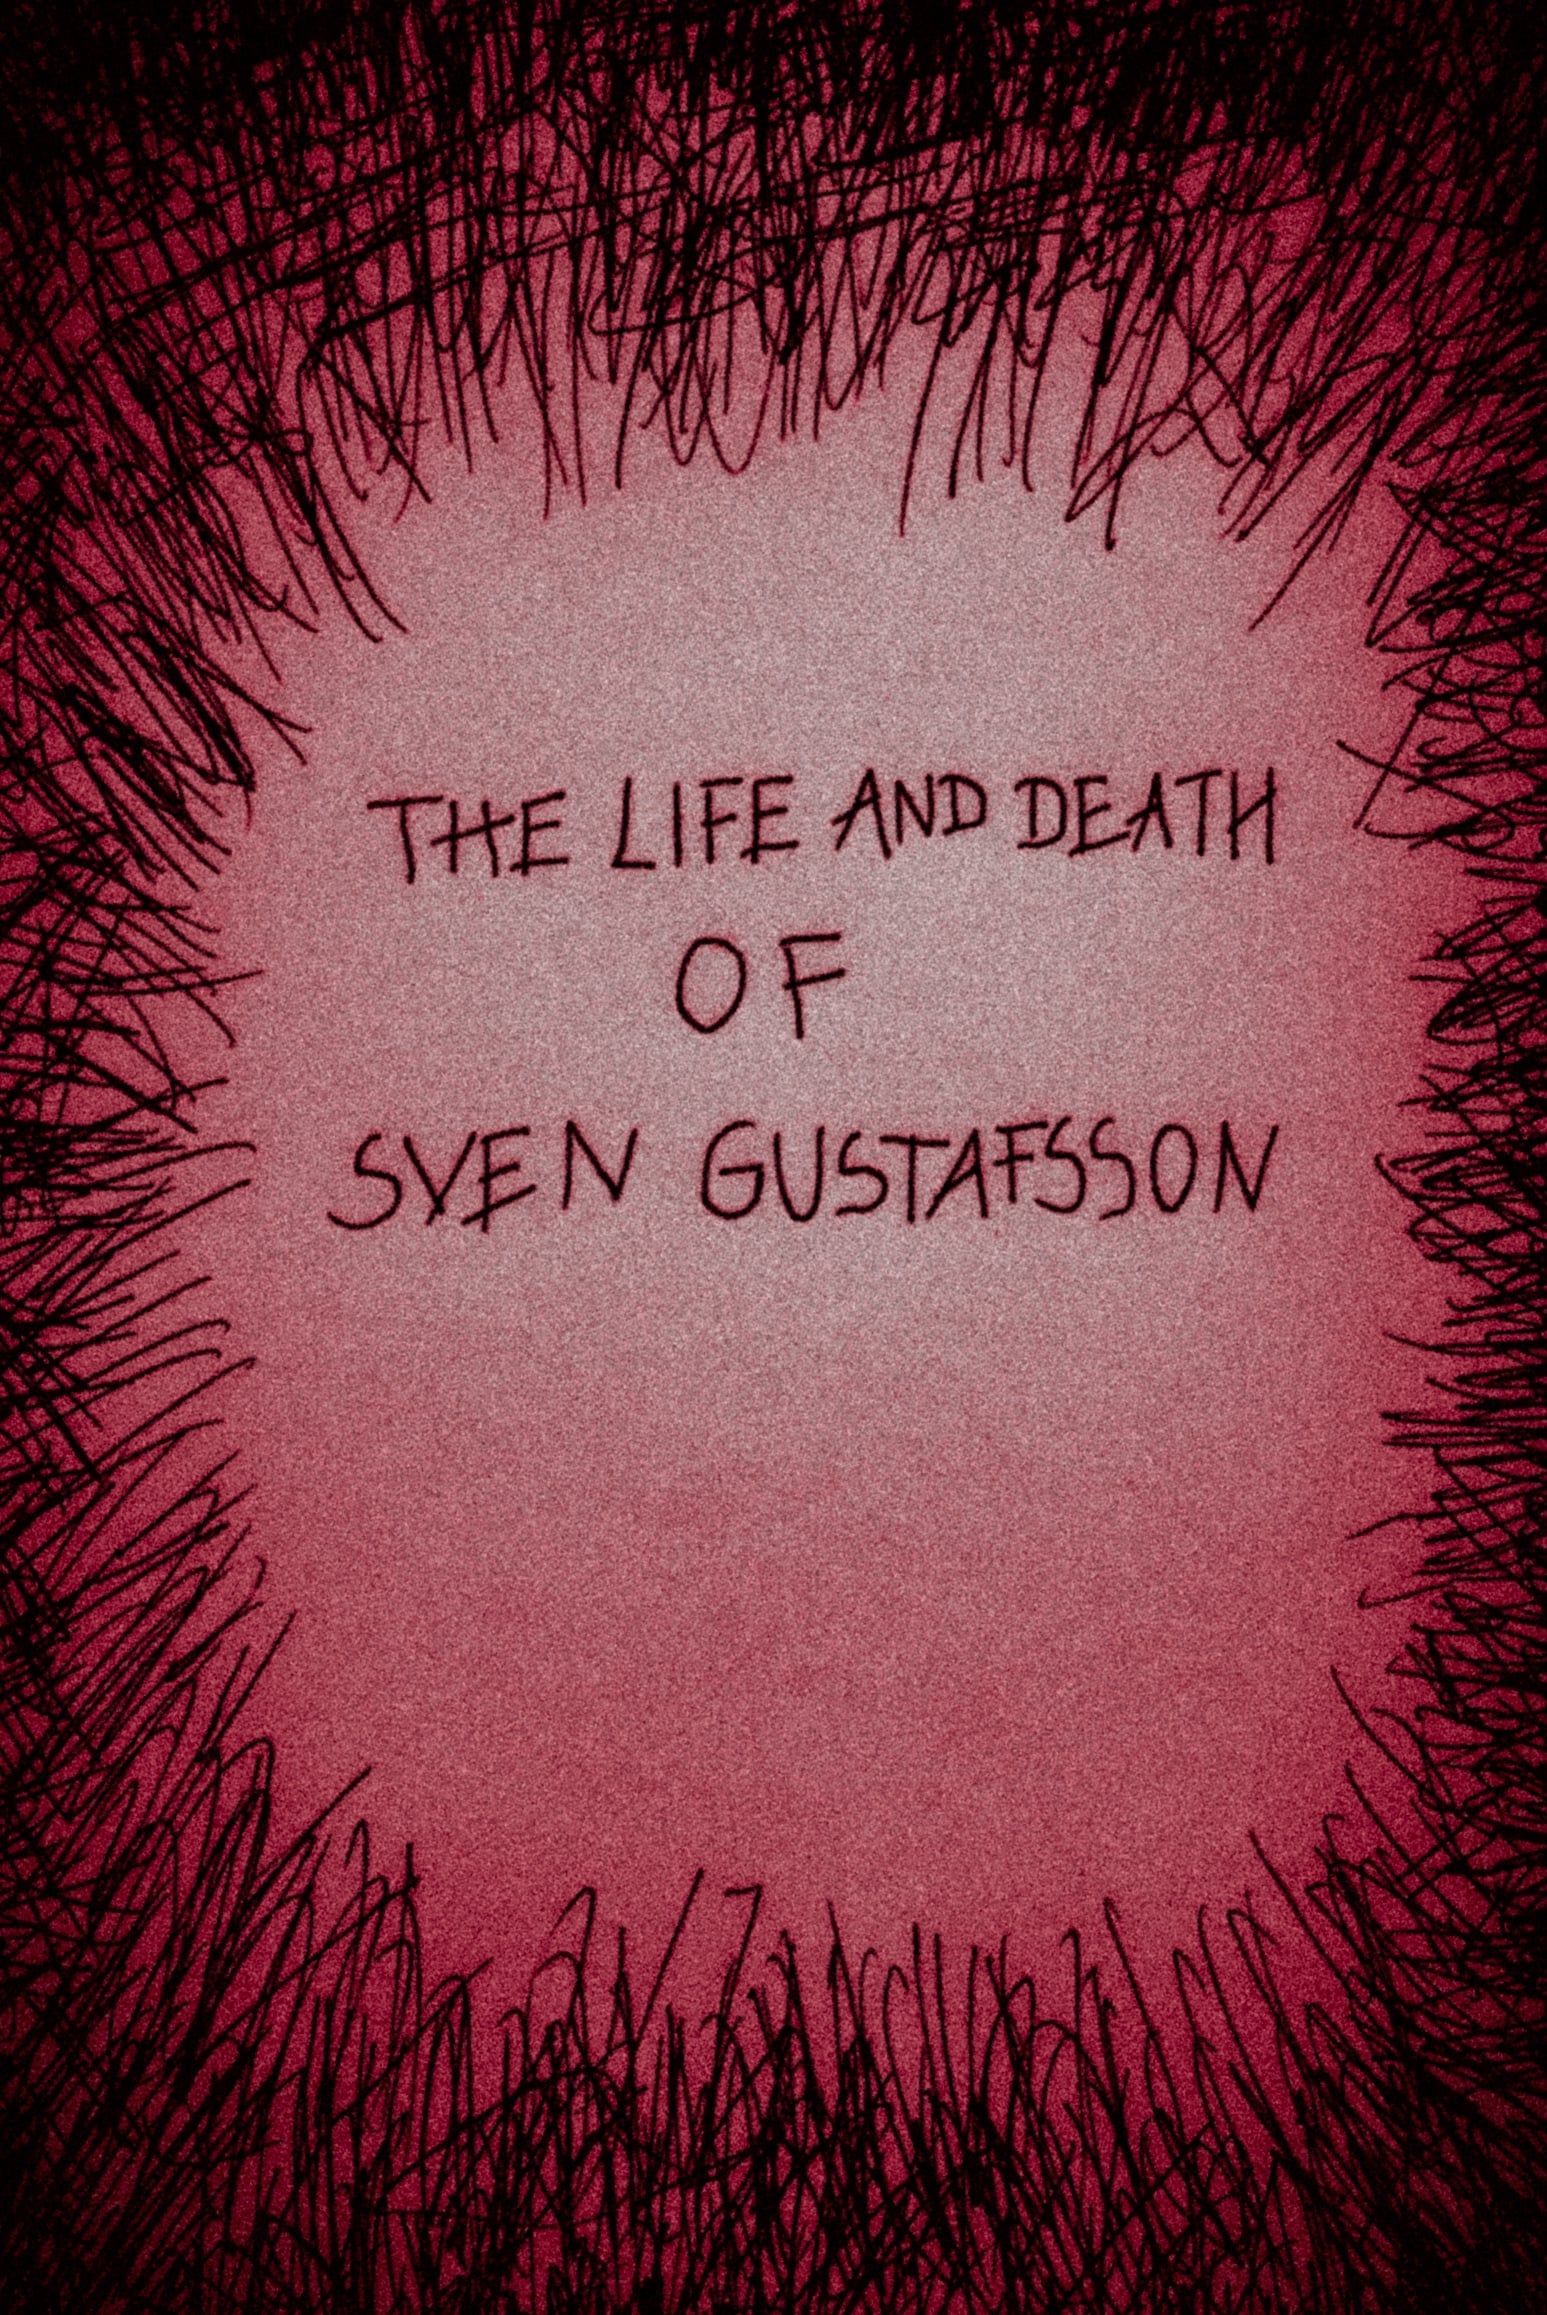 The Life and Death of Sven Gustafsson